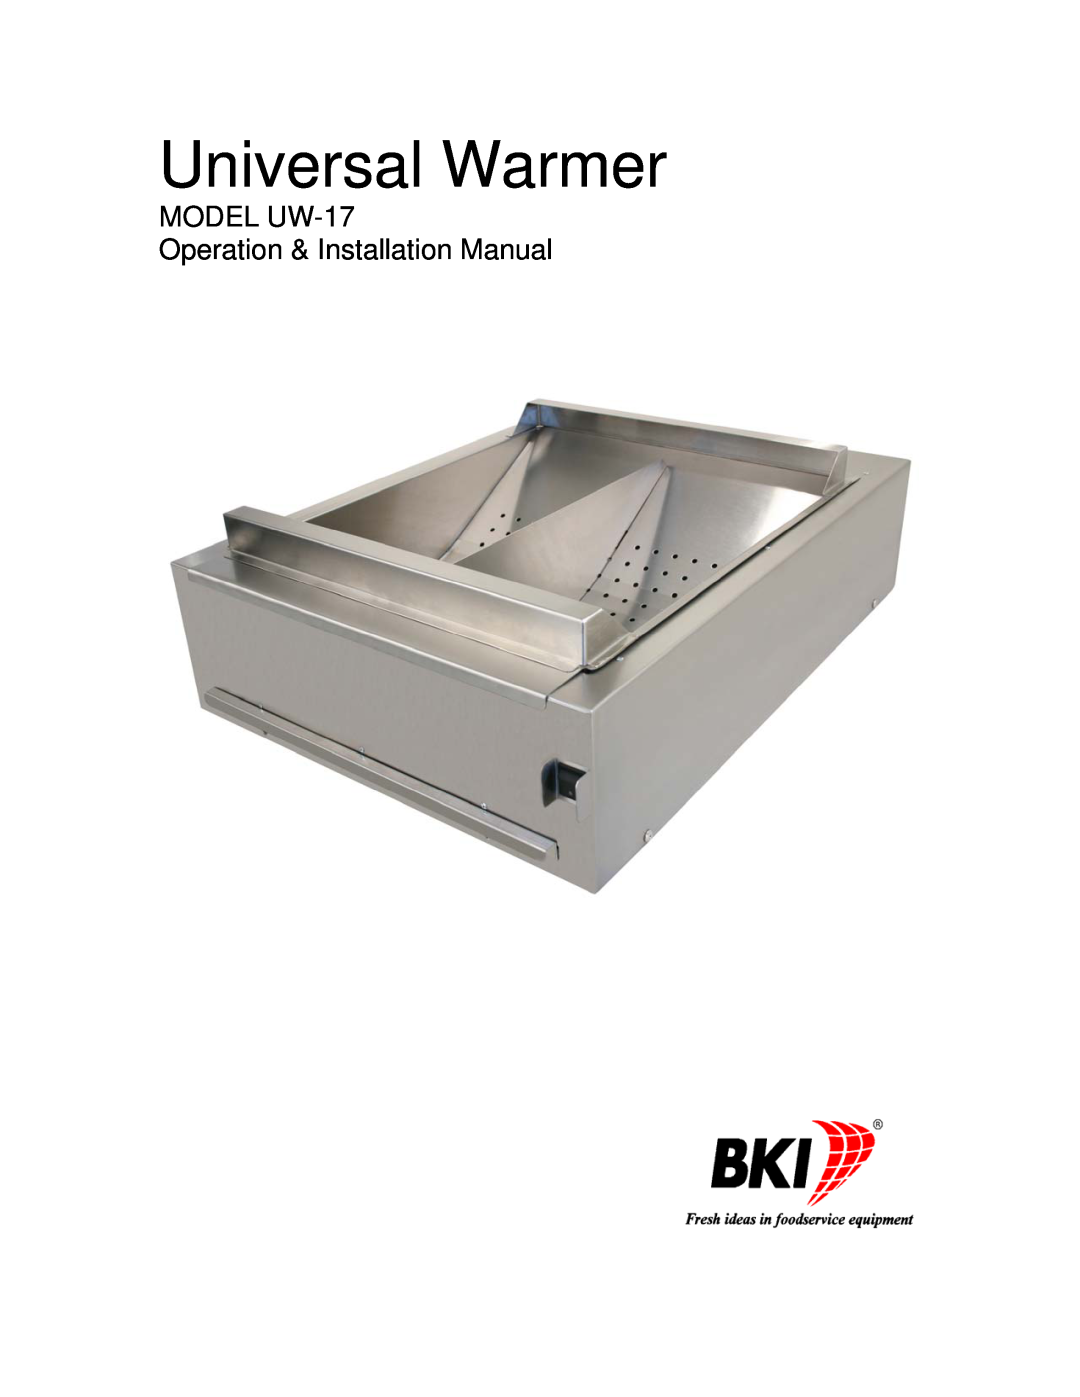 Bakers Pride Oven installation manual Universal Warmer, MODEL UW-17 Operation & Installation Manual 